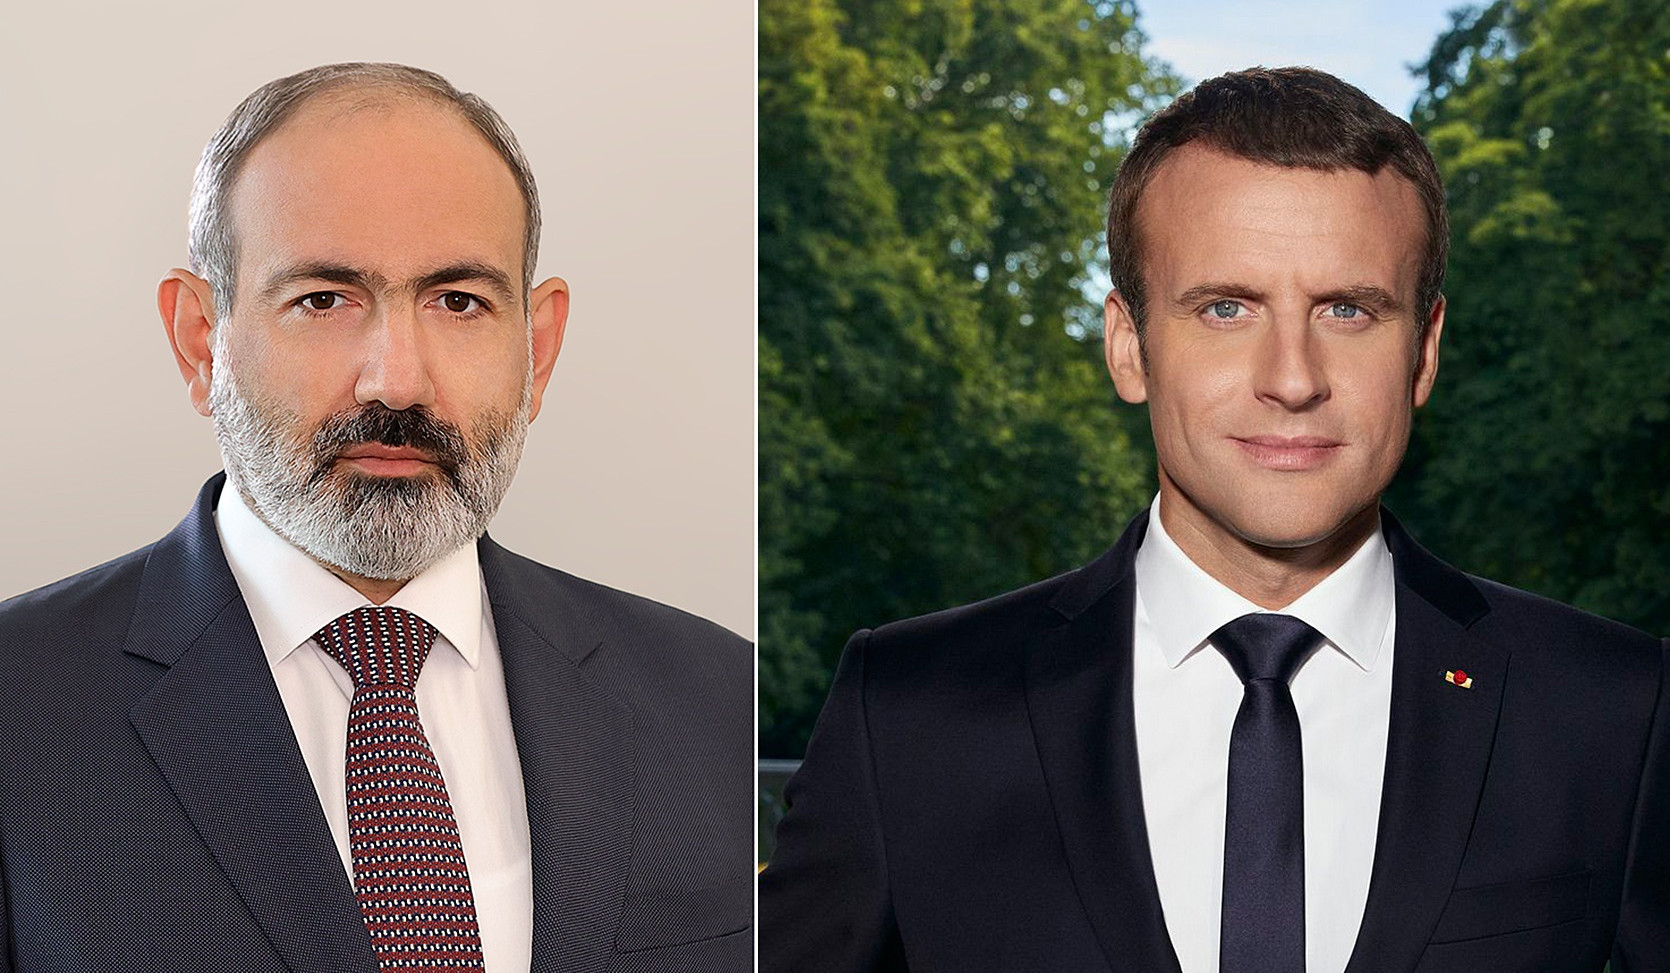 Prime Minister Pashinyan holds telephone conversation with Emmanuel Macron